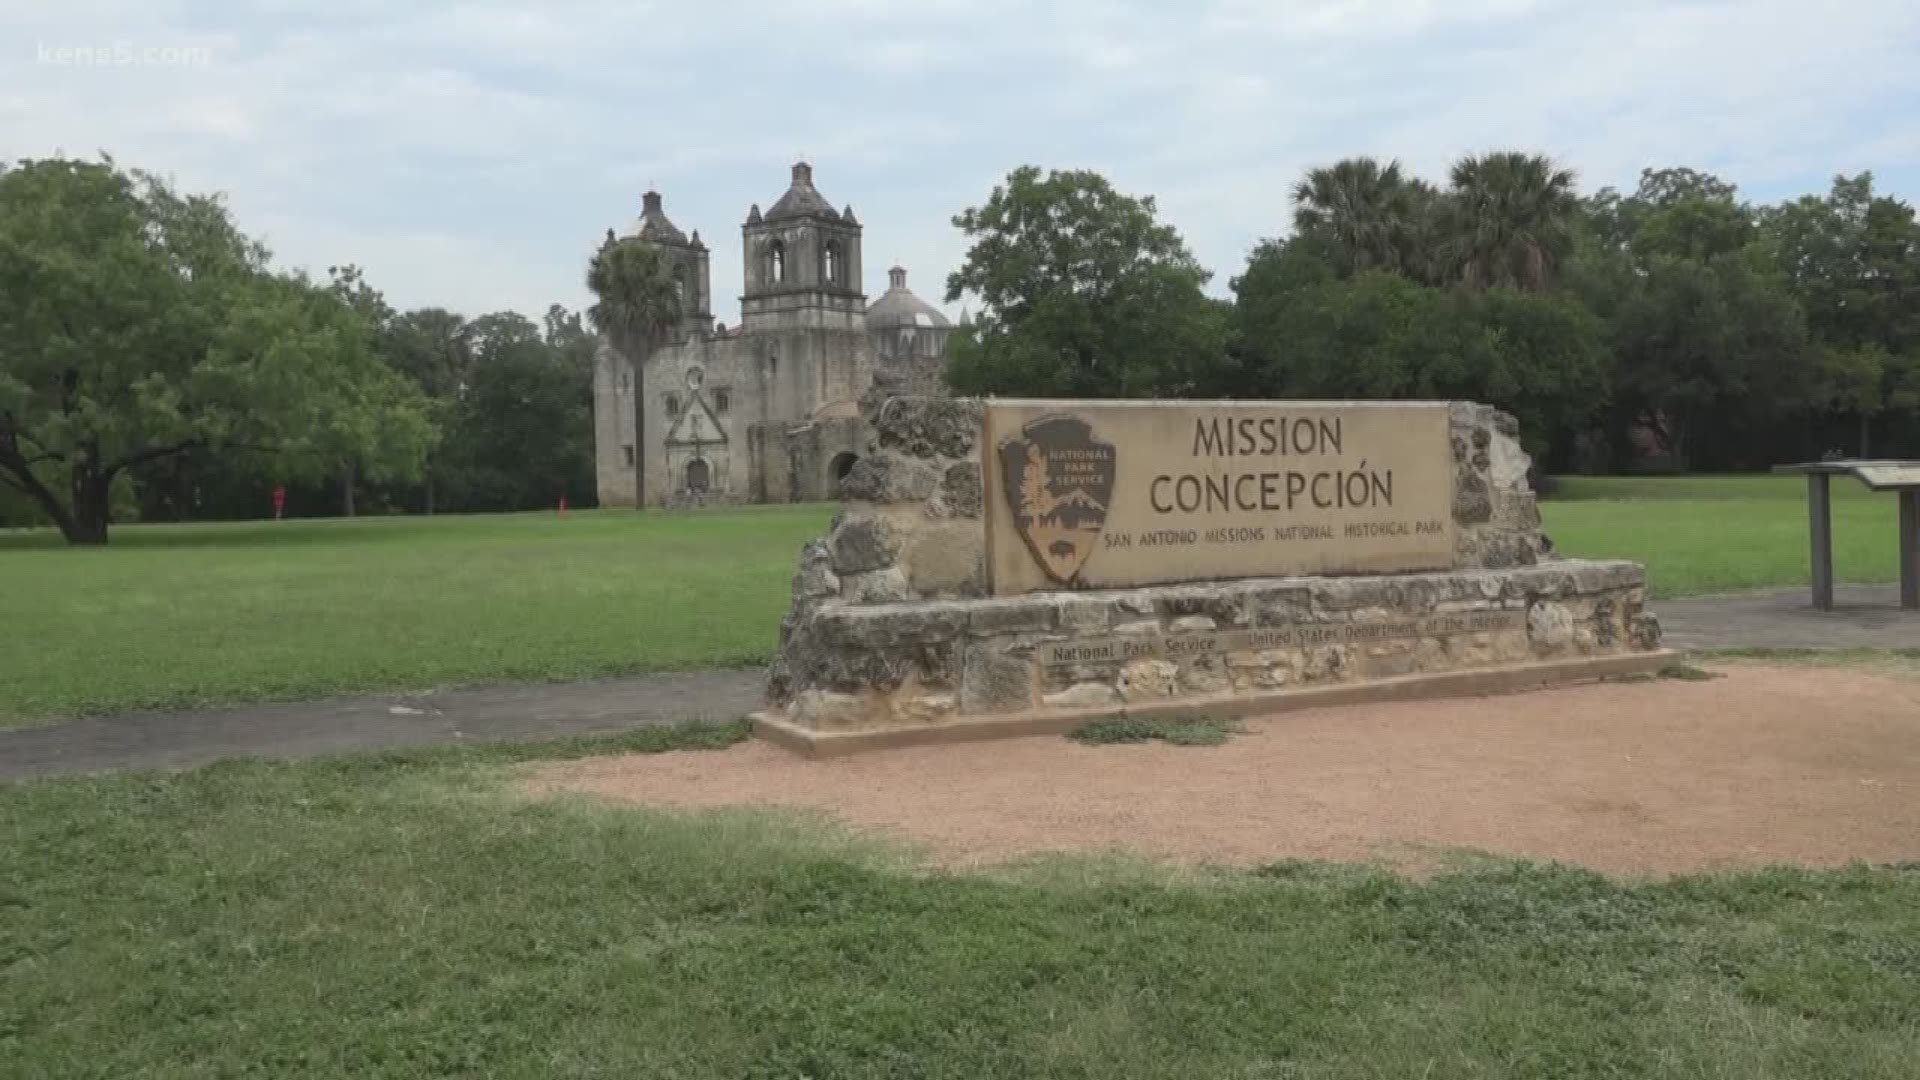 Mission Concepcion has been a treasured landmark in San Antonio since the 1700s. Today, the University of Texas at San Antonio is looking into ways to preserve it for the next 300 years.